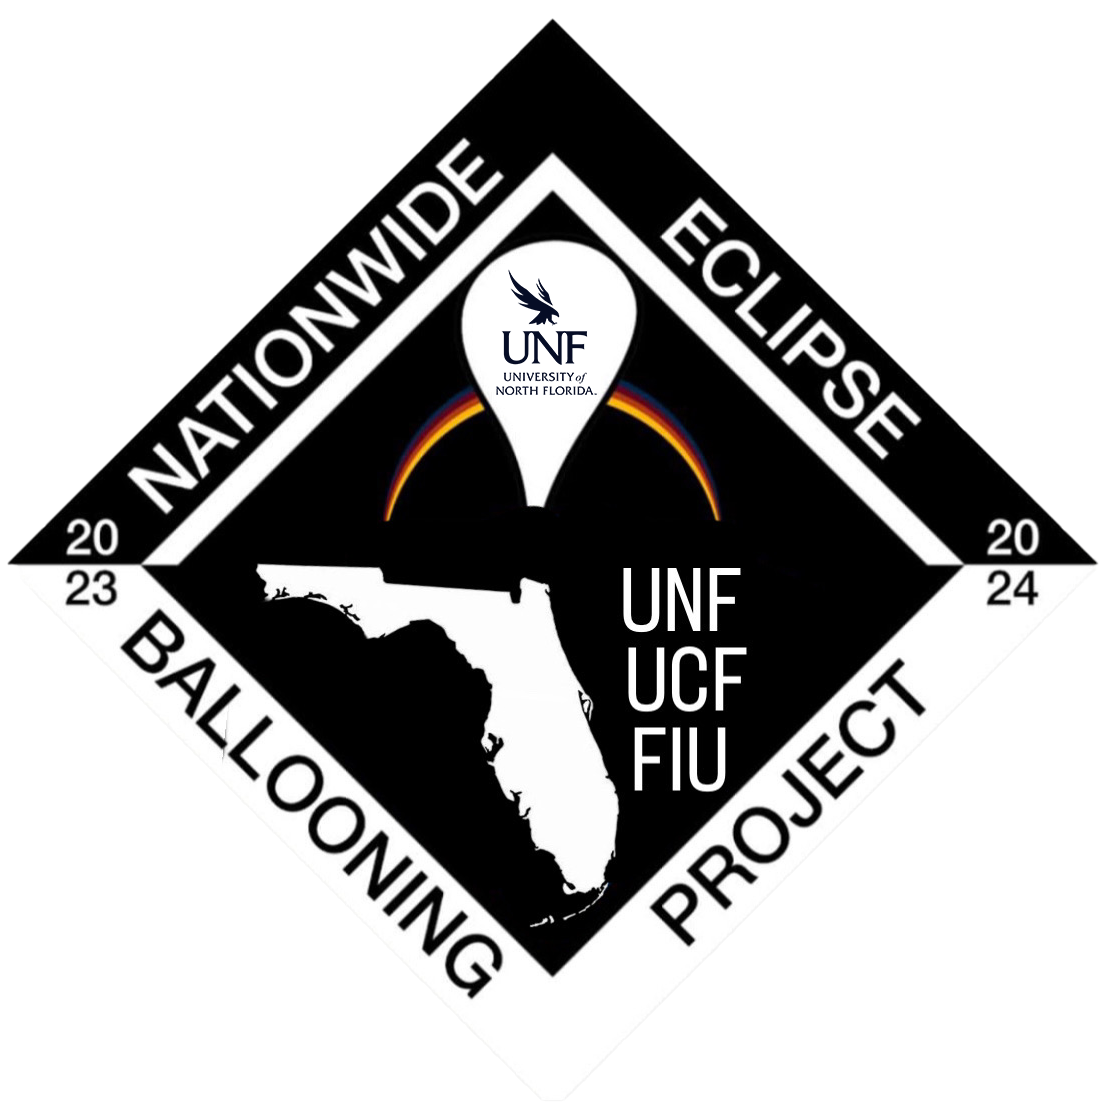 UNF, UCF, and FIU logo, featuring the state of florida and an inflated scientific balloon inside a square border